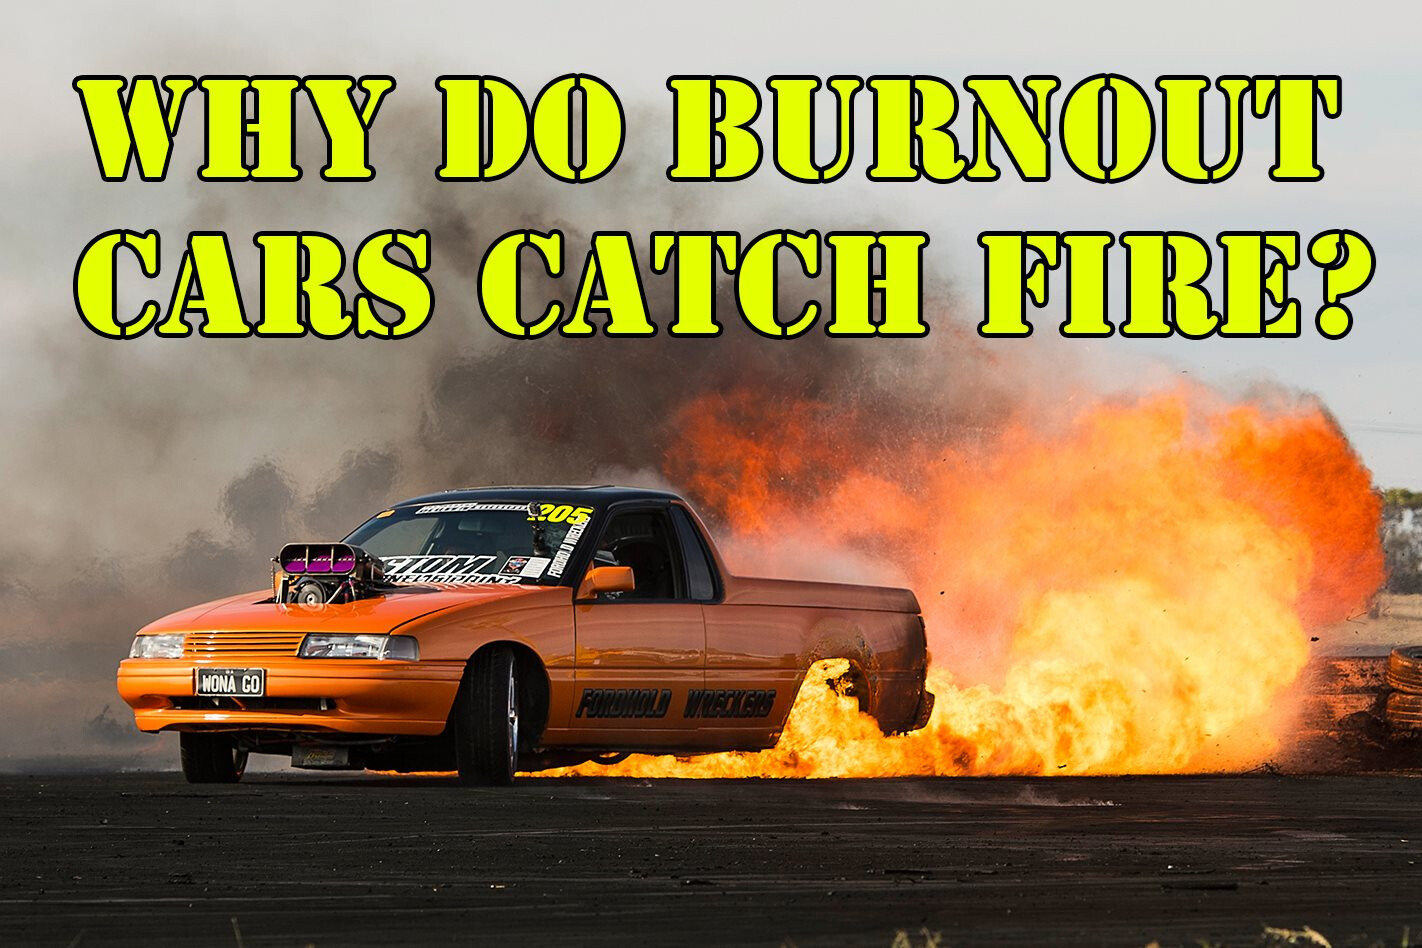 WHY DO BURNOUT CARS CATCH FIRE?